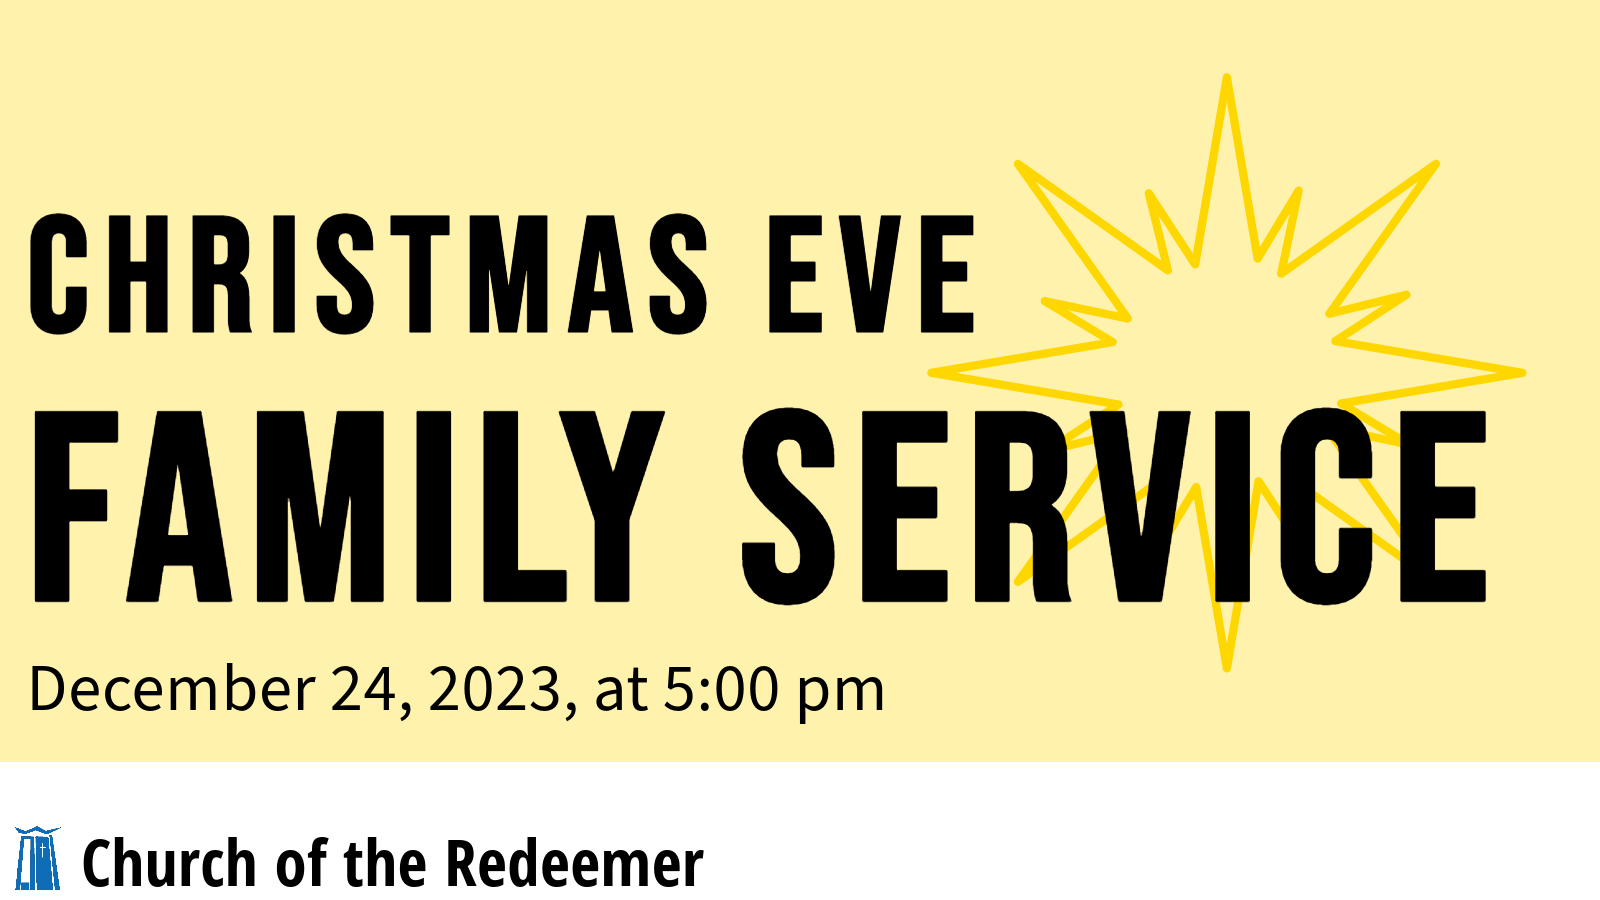 Christmas Eve Family Service at 5:00 pm on December 25